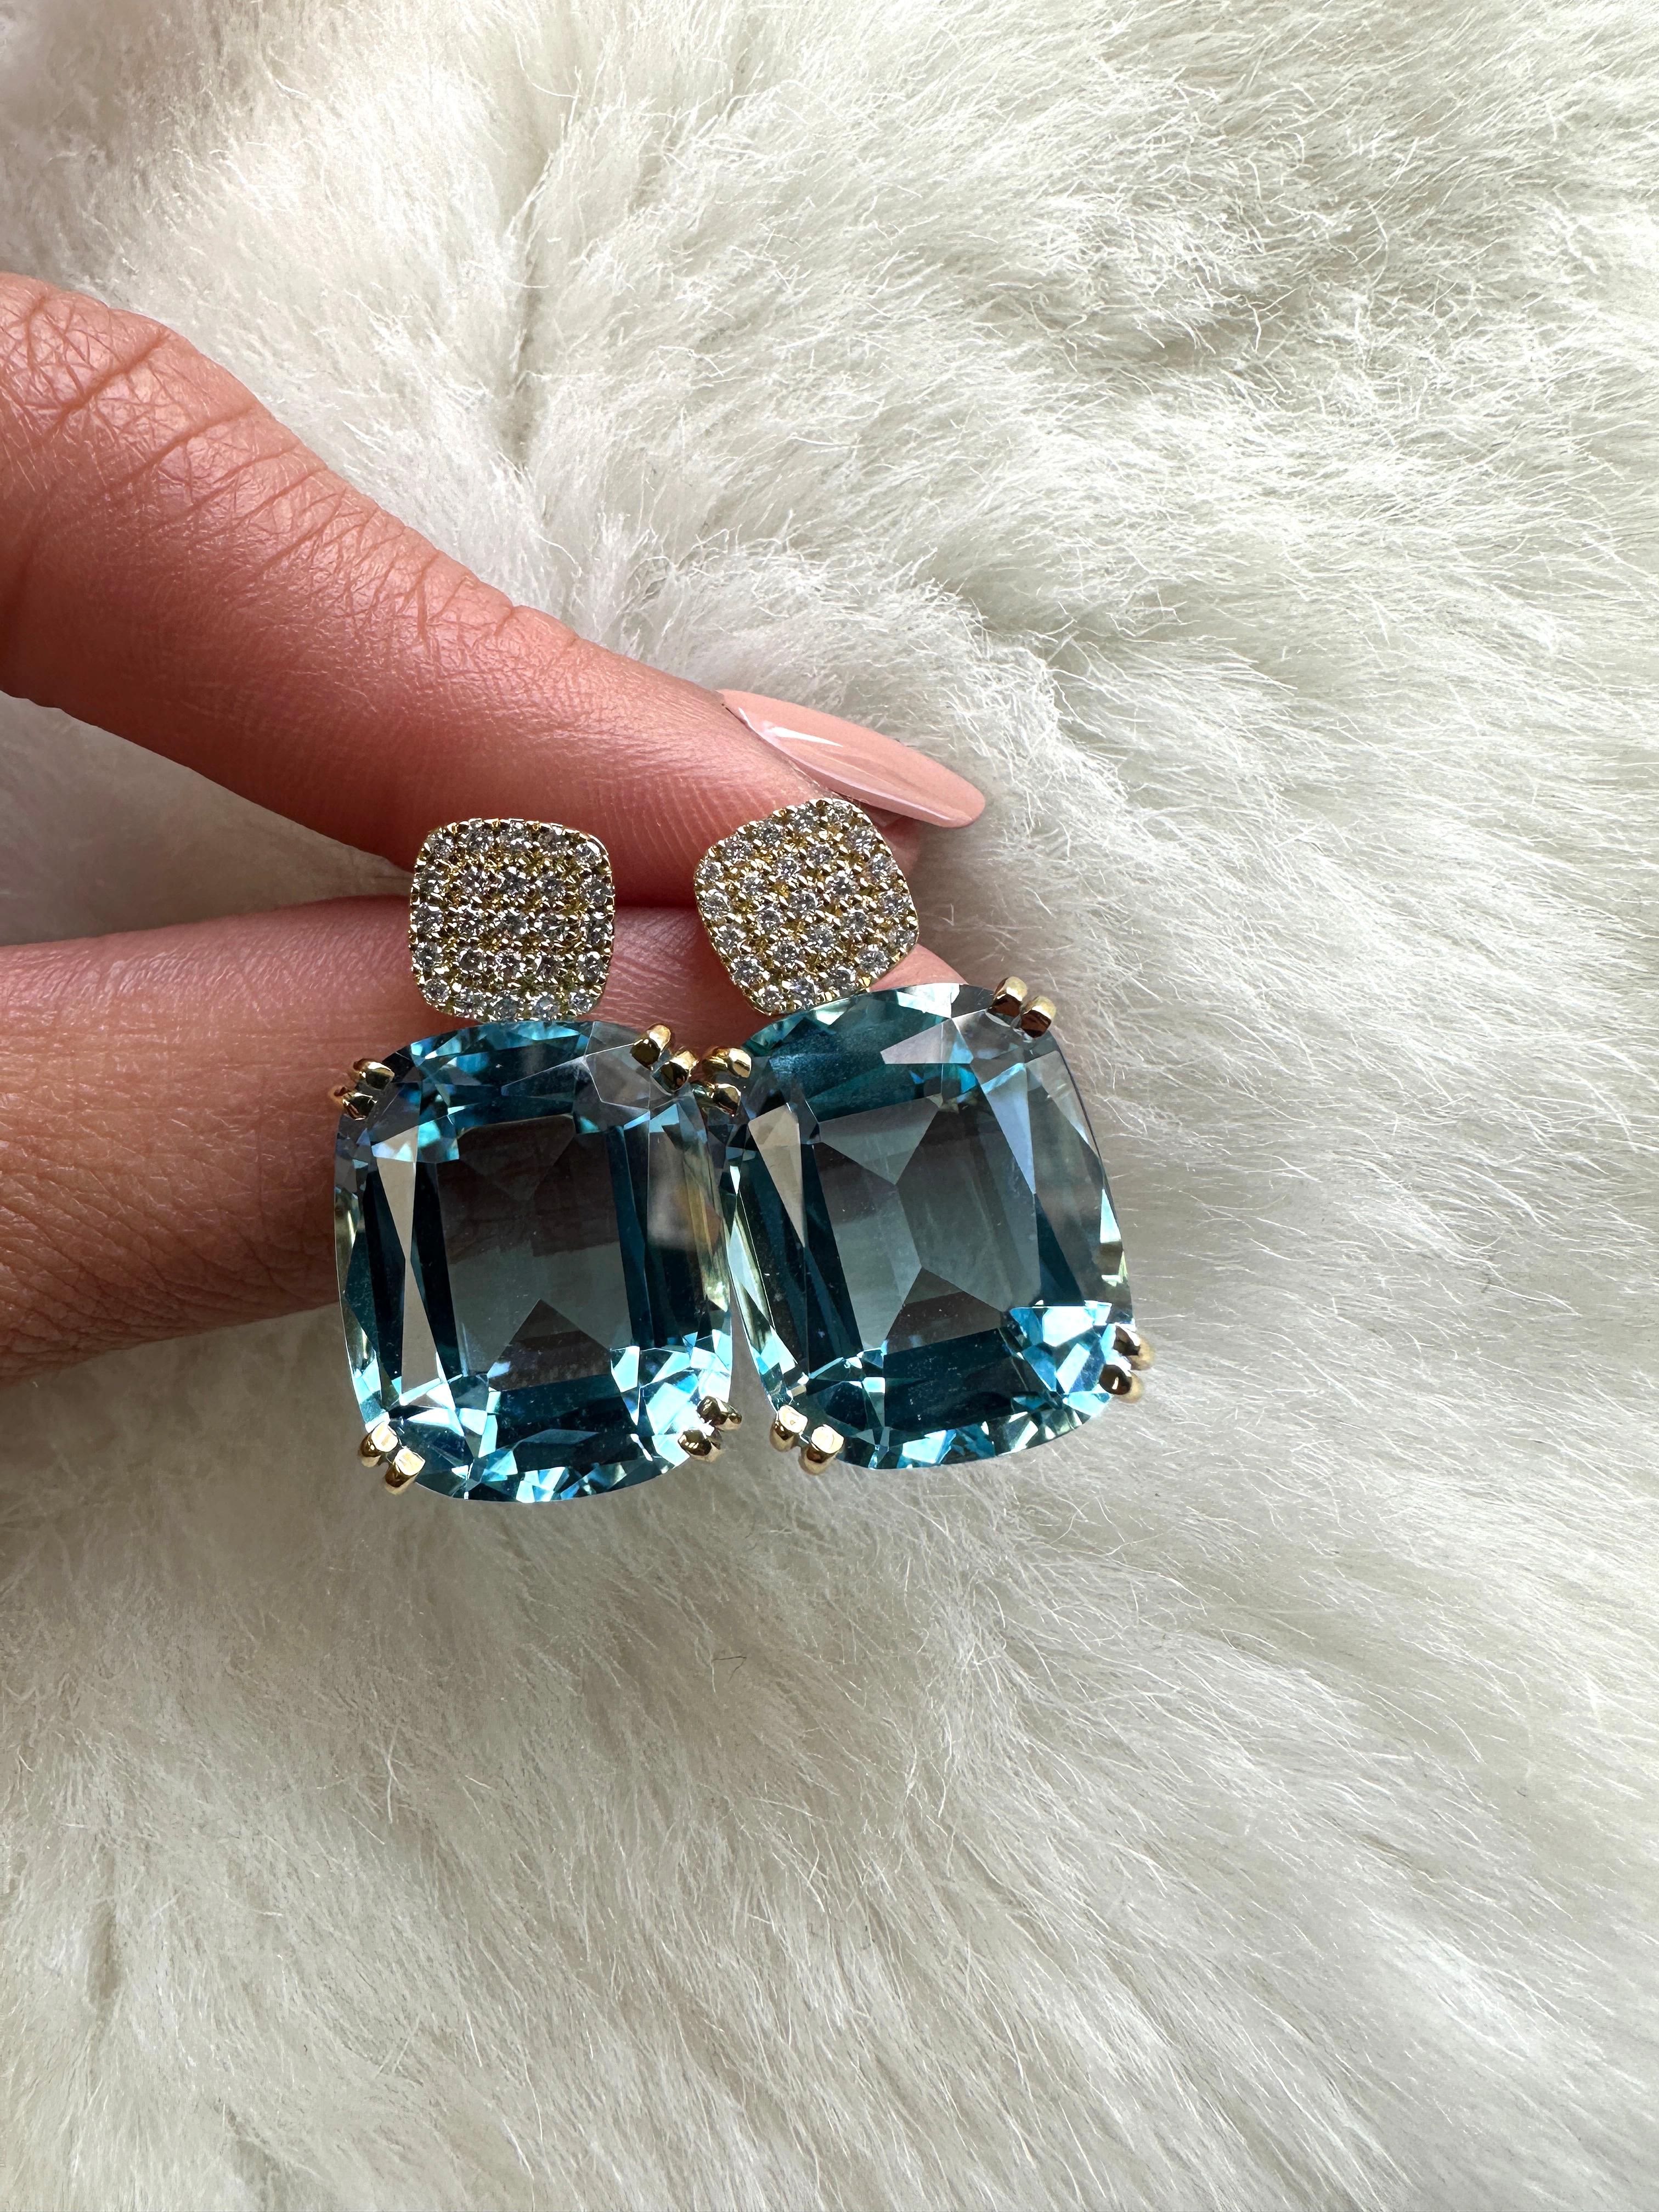 Introducing the stunning Blue Topaz Cushion & Diamonds Earrings from our popular 'Gossip' Collection. 
The focal point of these earrings is the mesmerizing blue topaz cushion-cut gemstone. The cushion-cut shape adds a touch of vintage charm, while